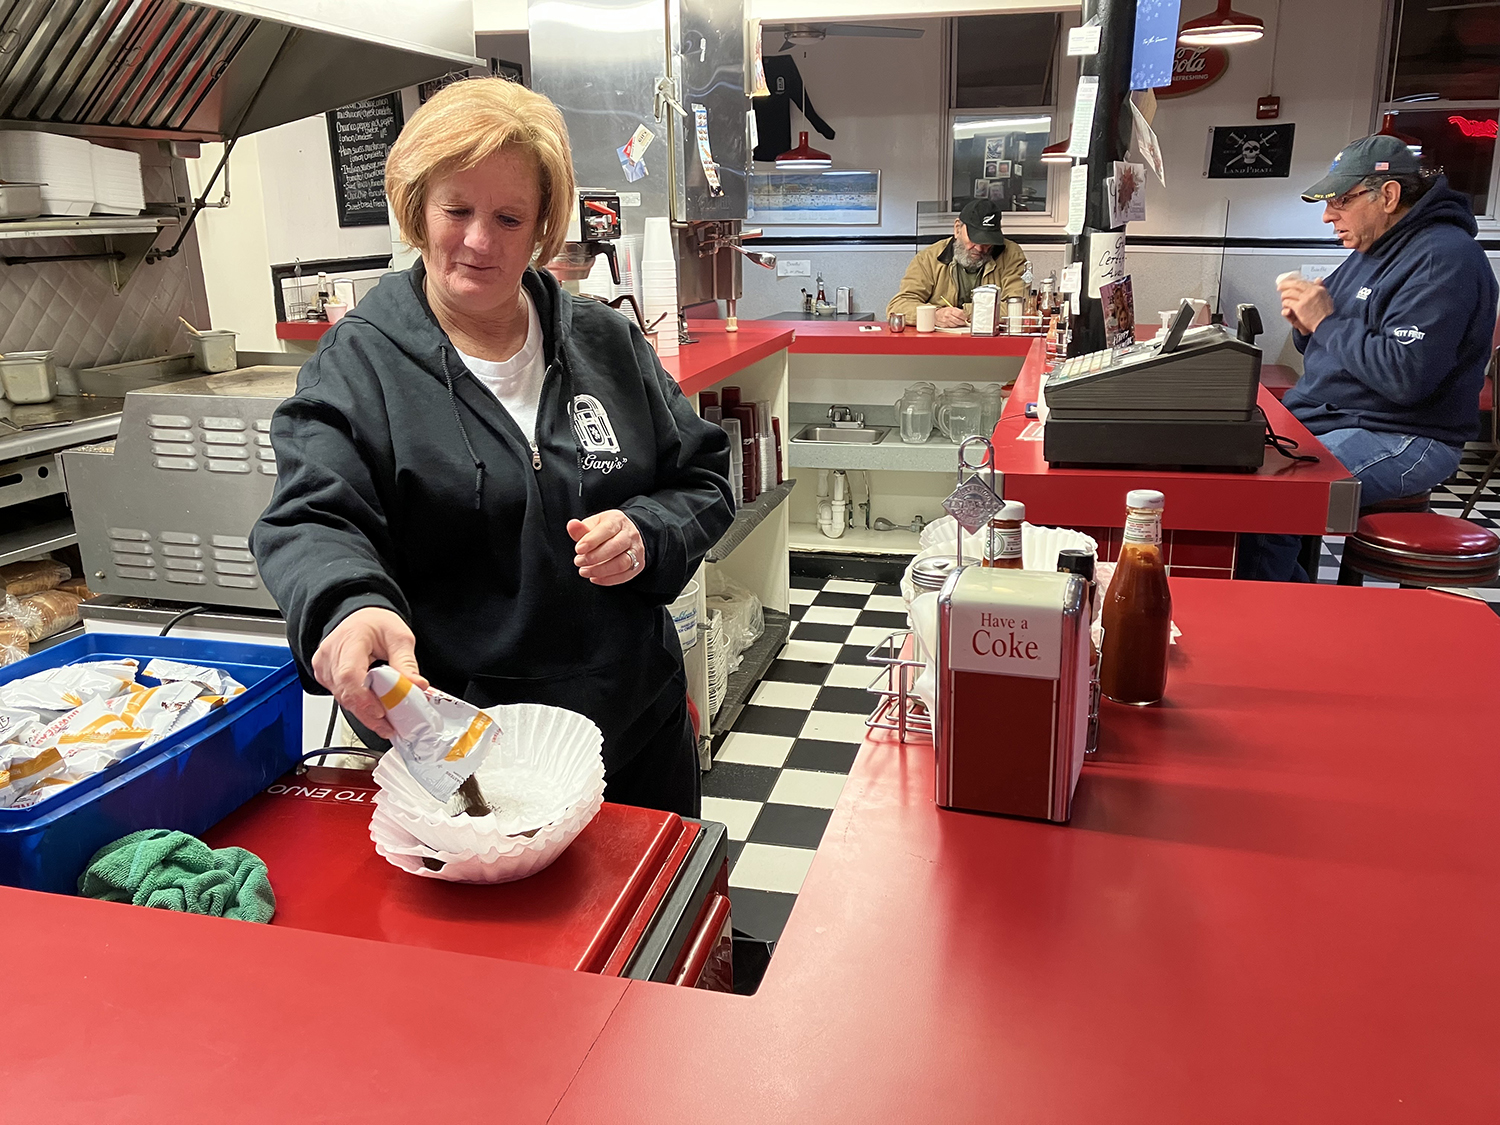 First thing in the morning, Leanne Hamilton preps coffee for the day on Tuesday, Jan. 24, 2023. Hamilton owns her own restaurant, Chelsea's in Middletown, but she still comes to work at Gary's Handy Lunch, her family's diner, once a week.